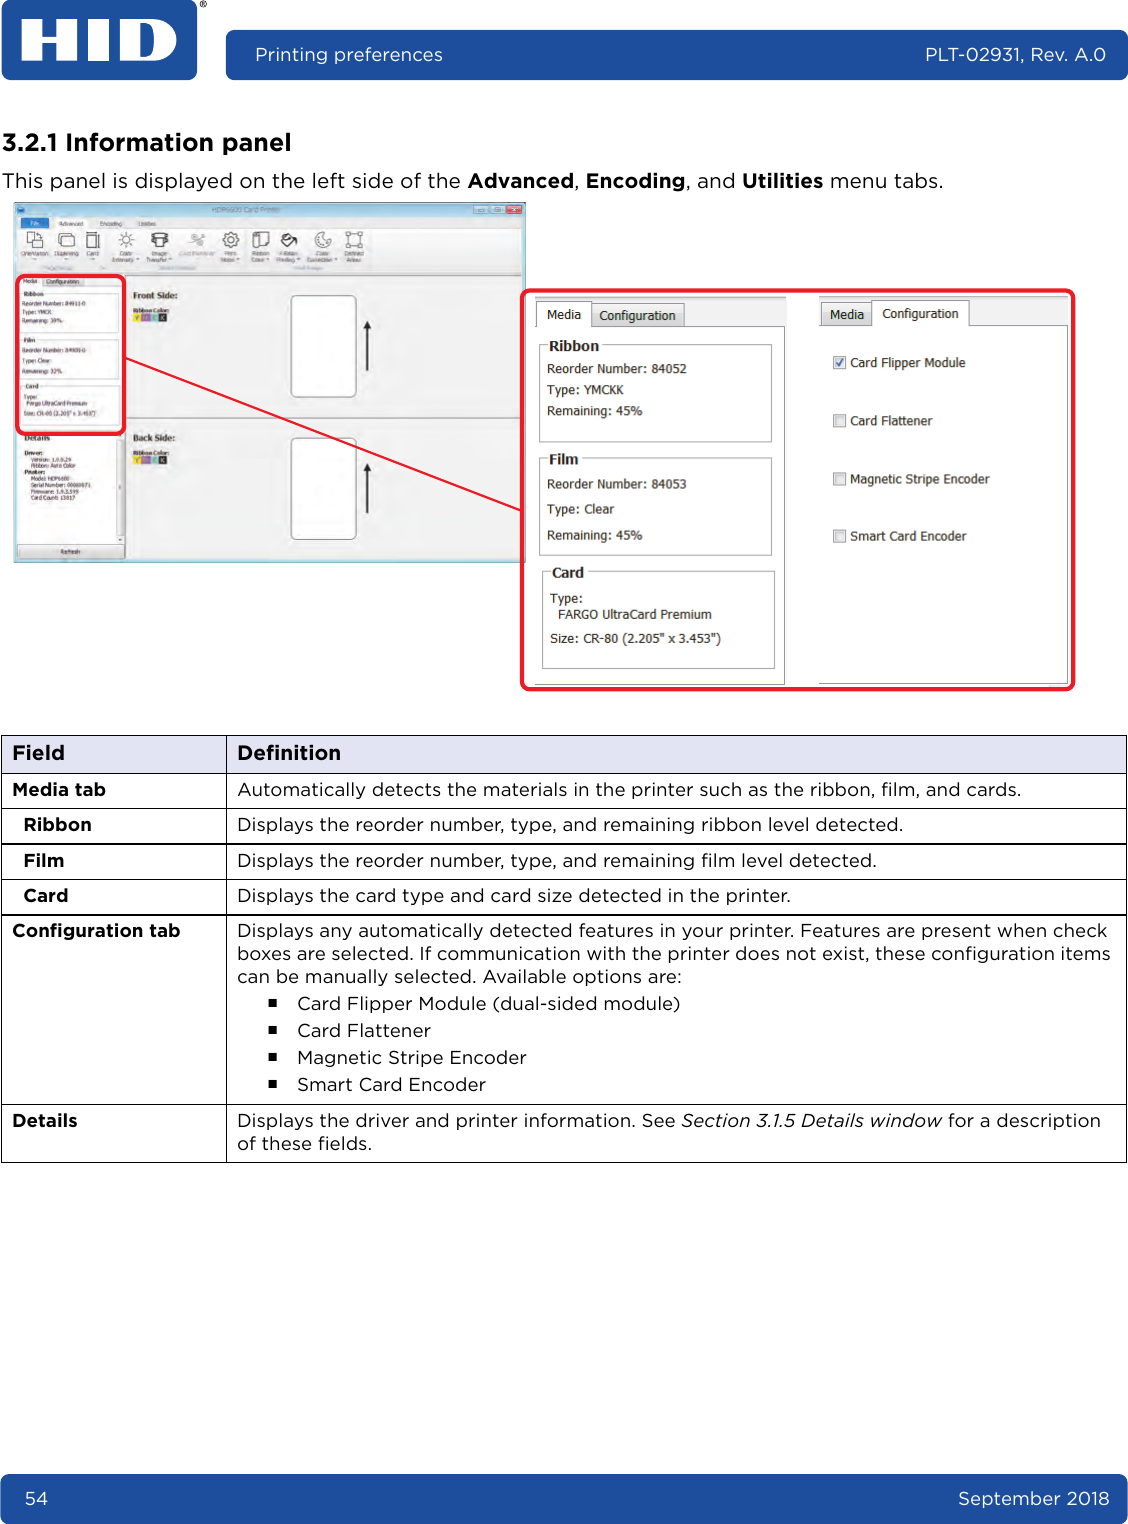 54 September 2018Printing preferences PLT-02931, Rev. A.03.2.1 Information panelThis panel is displayed on the left side of the Advanced, Encoding, and Utilities menu tabs. Field DefinitionMedia tab Automatically detects the materials in the printer such as the ribbon, film, and cards.Ribbon Displays the reorder number, type, and remaining ribbon level detected.Film Displays the reorder number, type, and remaining film level detected. Card Displays the card type and card size detected in the printer.Configuration tab Displays any automatically detected features in your printer. Features are present when check boxes are selected. If communication with the printer does not exist, these configuration items can be manually selected. Available options are:႑Card Flipper Module (dual-sided module)႑Card Flattener႑Magnetic Stripe Encoder႑Smart Card EncoderDetails Displays the driver and printer information. See Section 3.1.5 Details window for a description of these fields.